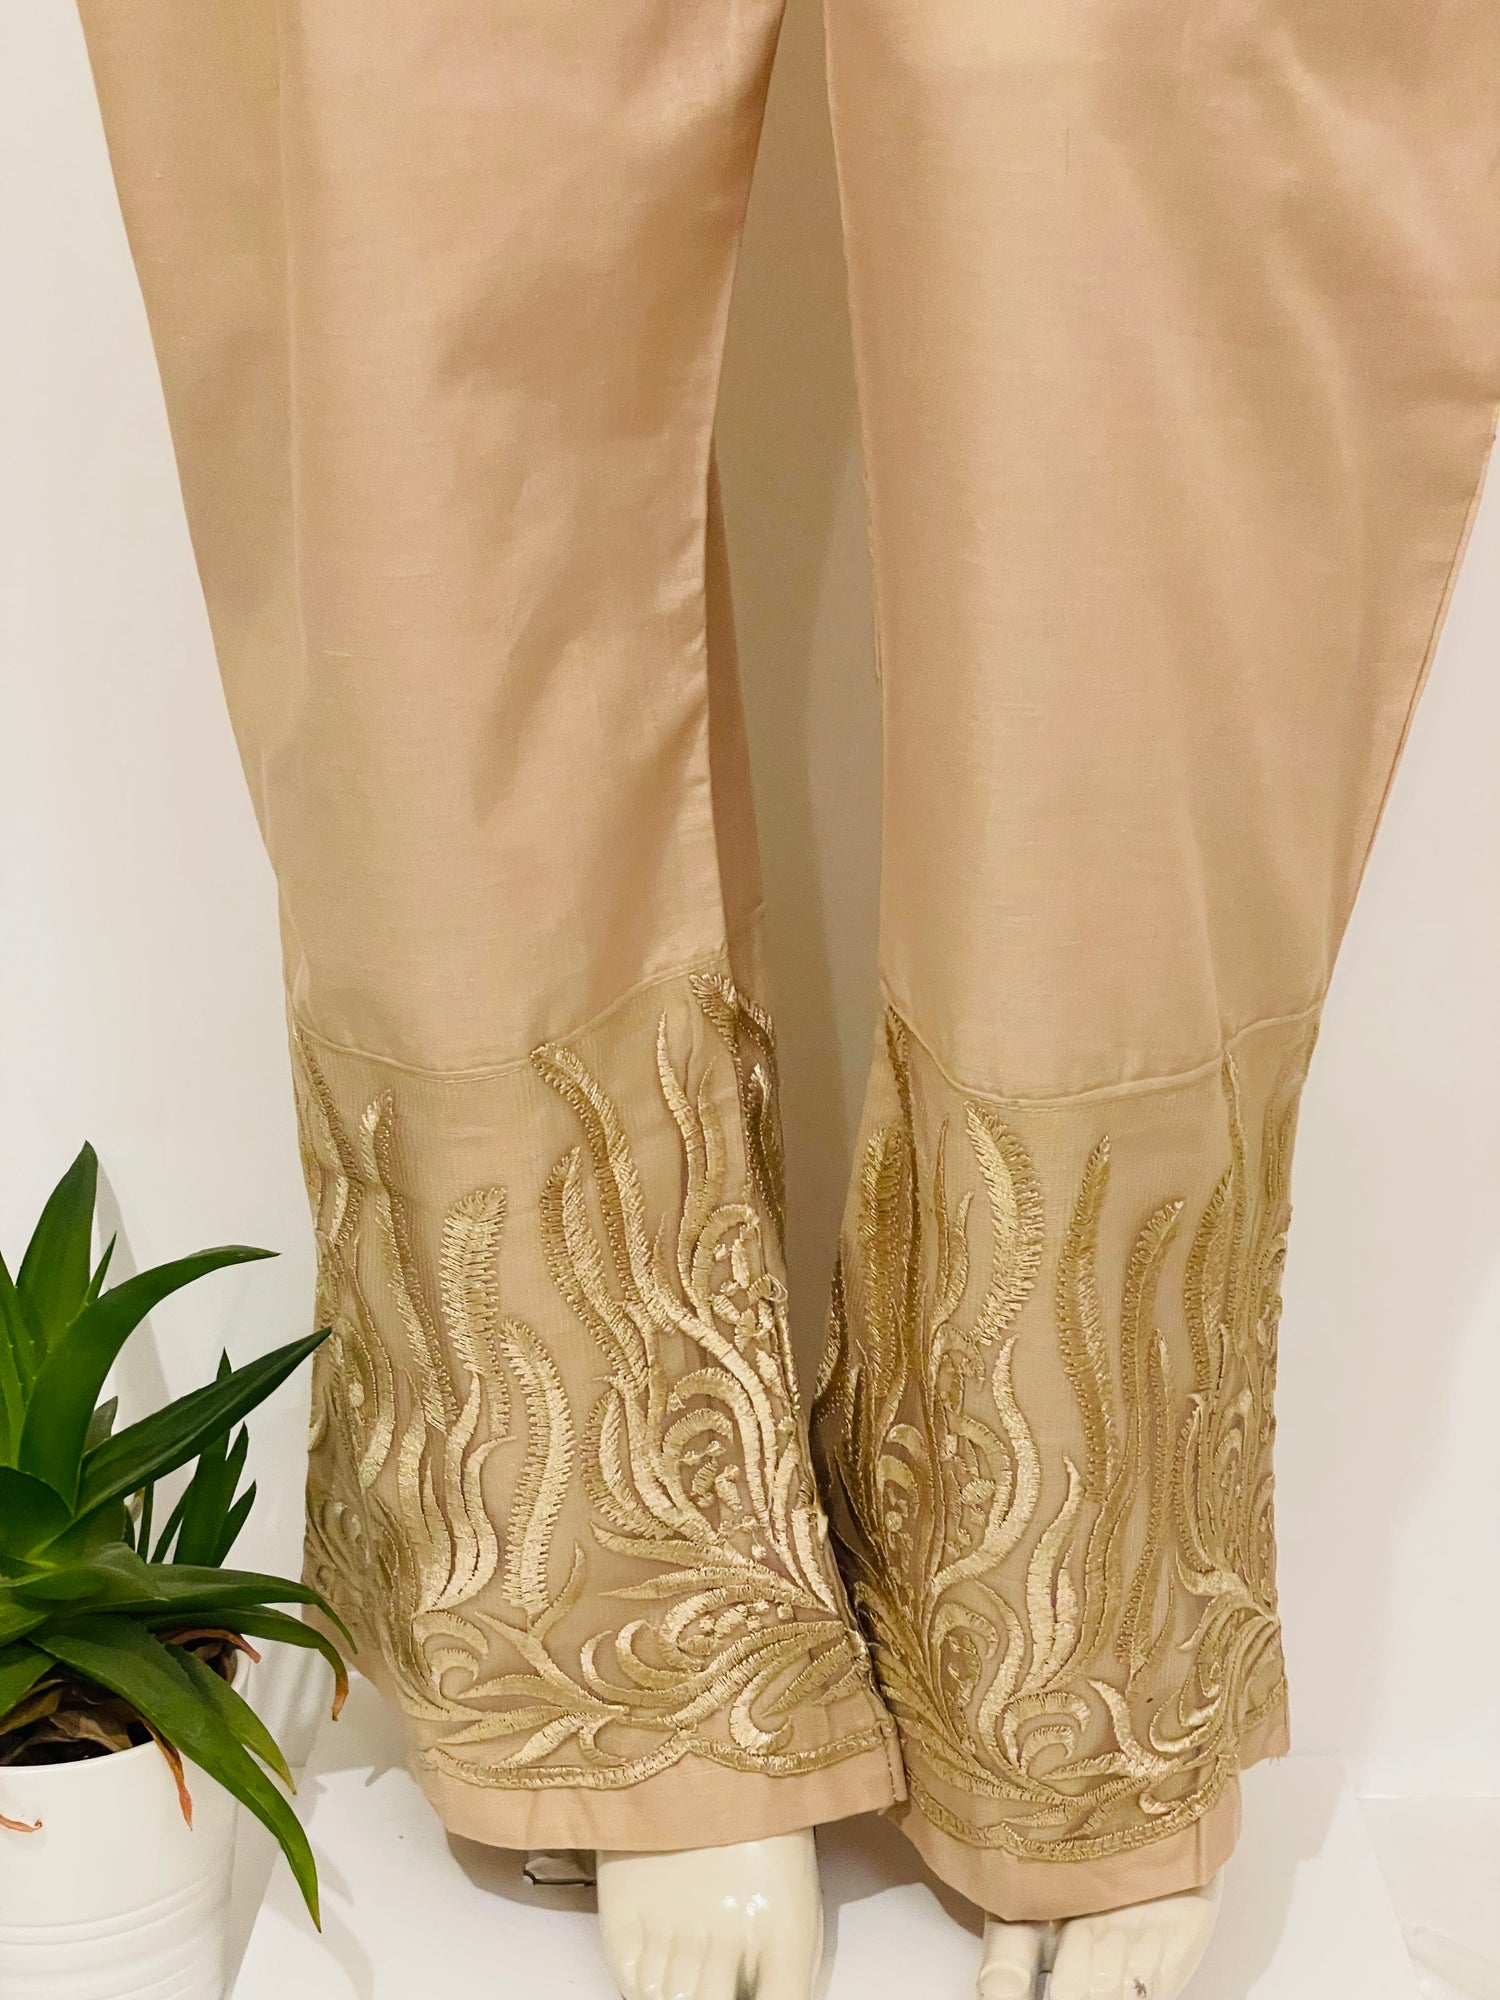 LADIES TROUSERS PAKISTANI pencil pants net lace with embroidery Many  Colours) £6.50 - PicClick UK